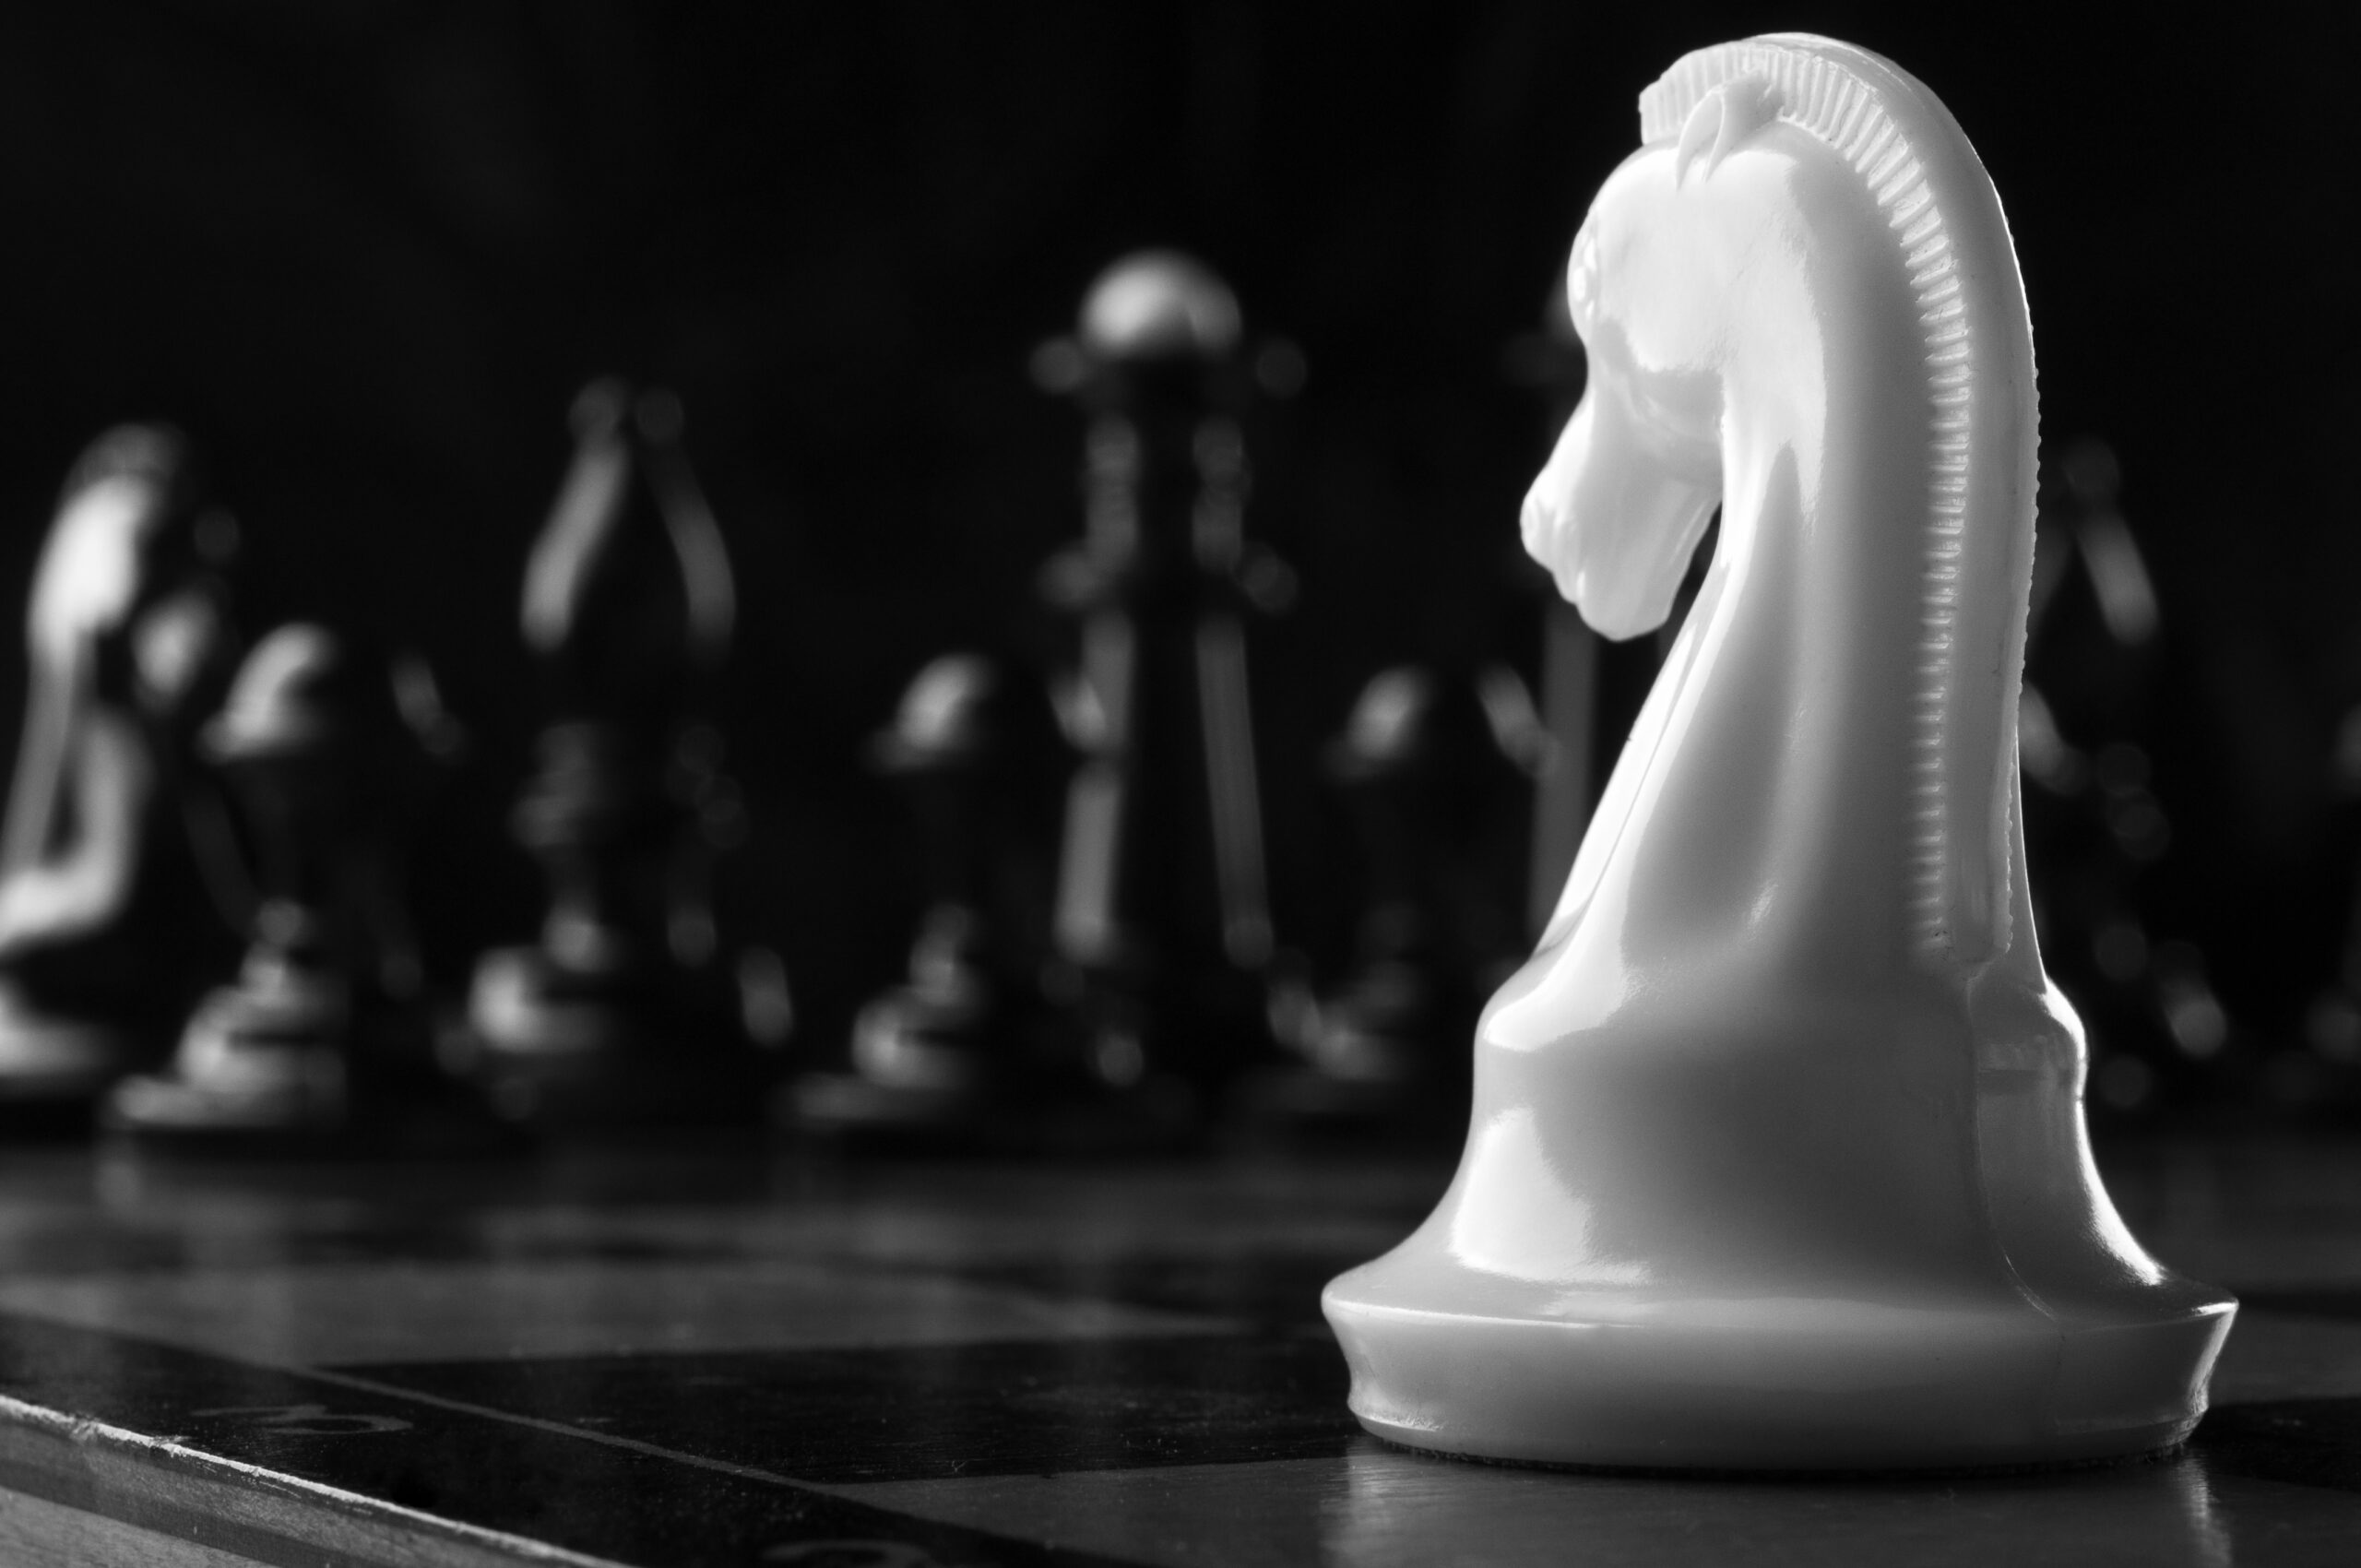 A white knight chess piece facing black chess pieces in a strategic face-off